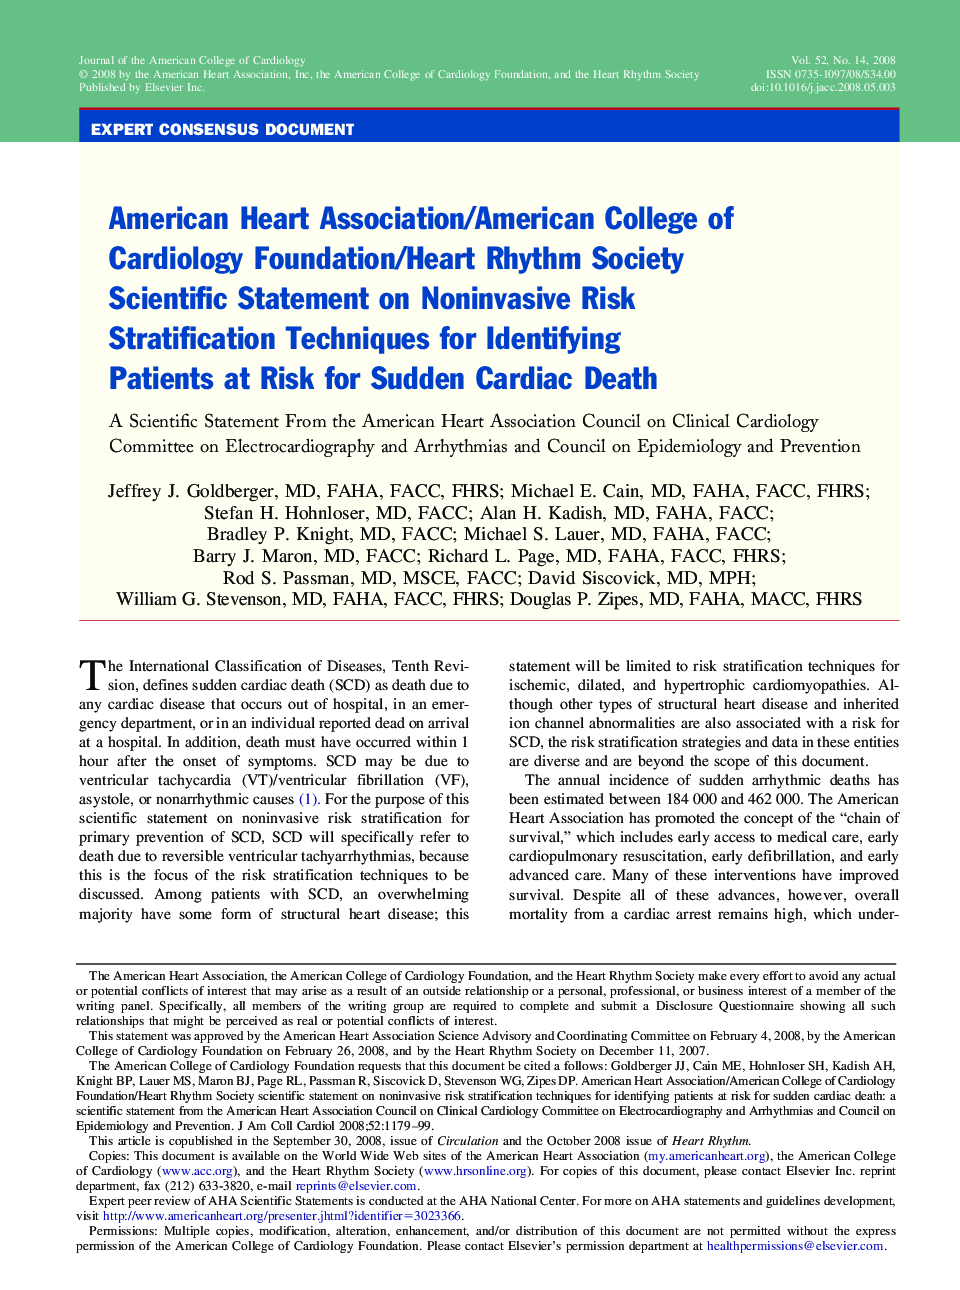 American Heart Association/American College of Cardiology Foundation/Heart Rhythm Society Scientific Statement on Noninvasive Risk Stratification Techniques for Identifying Patients at Risk for Sudden Cardiac Death